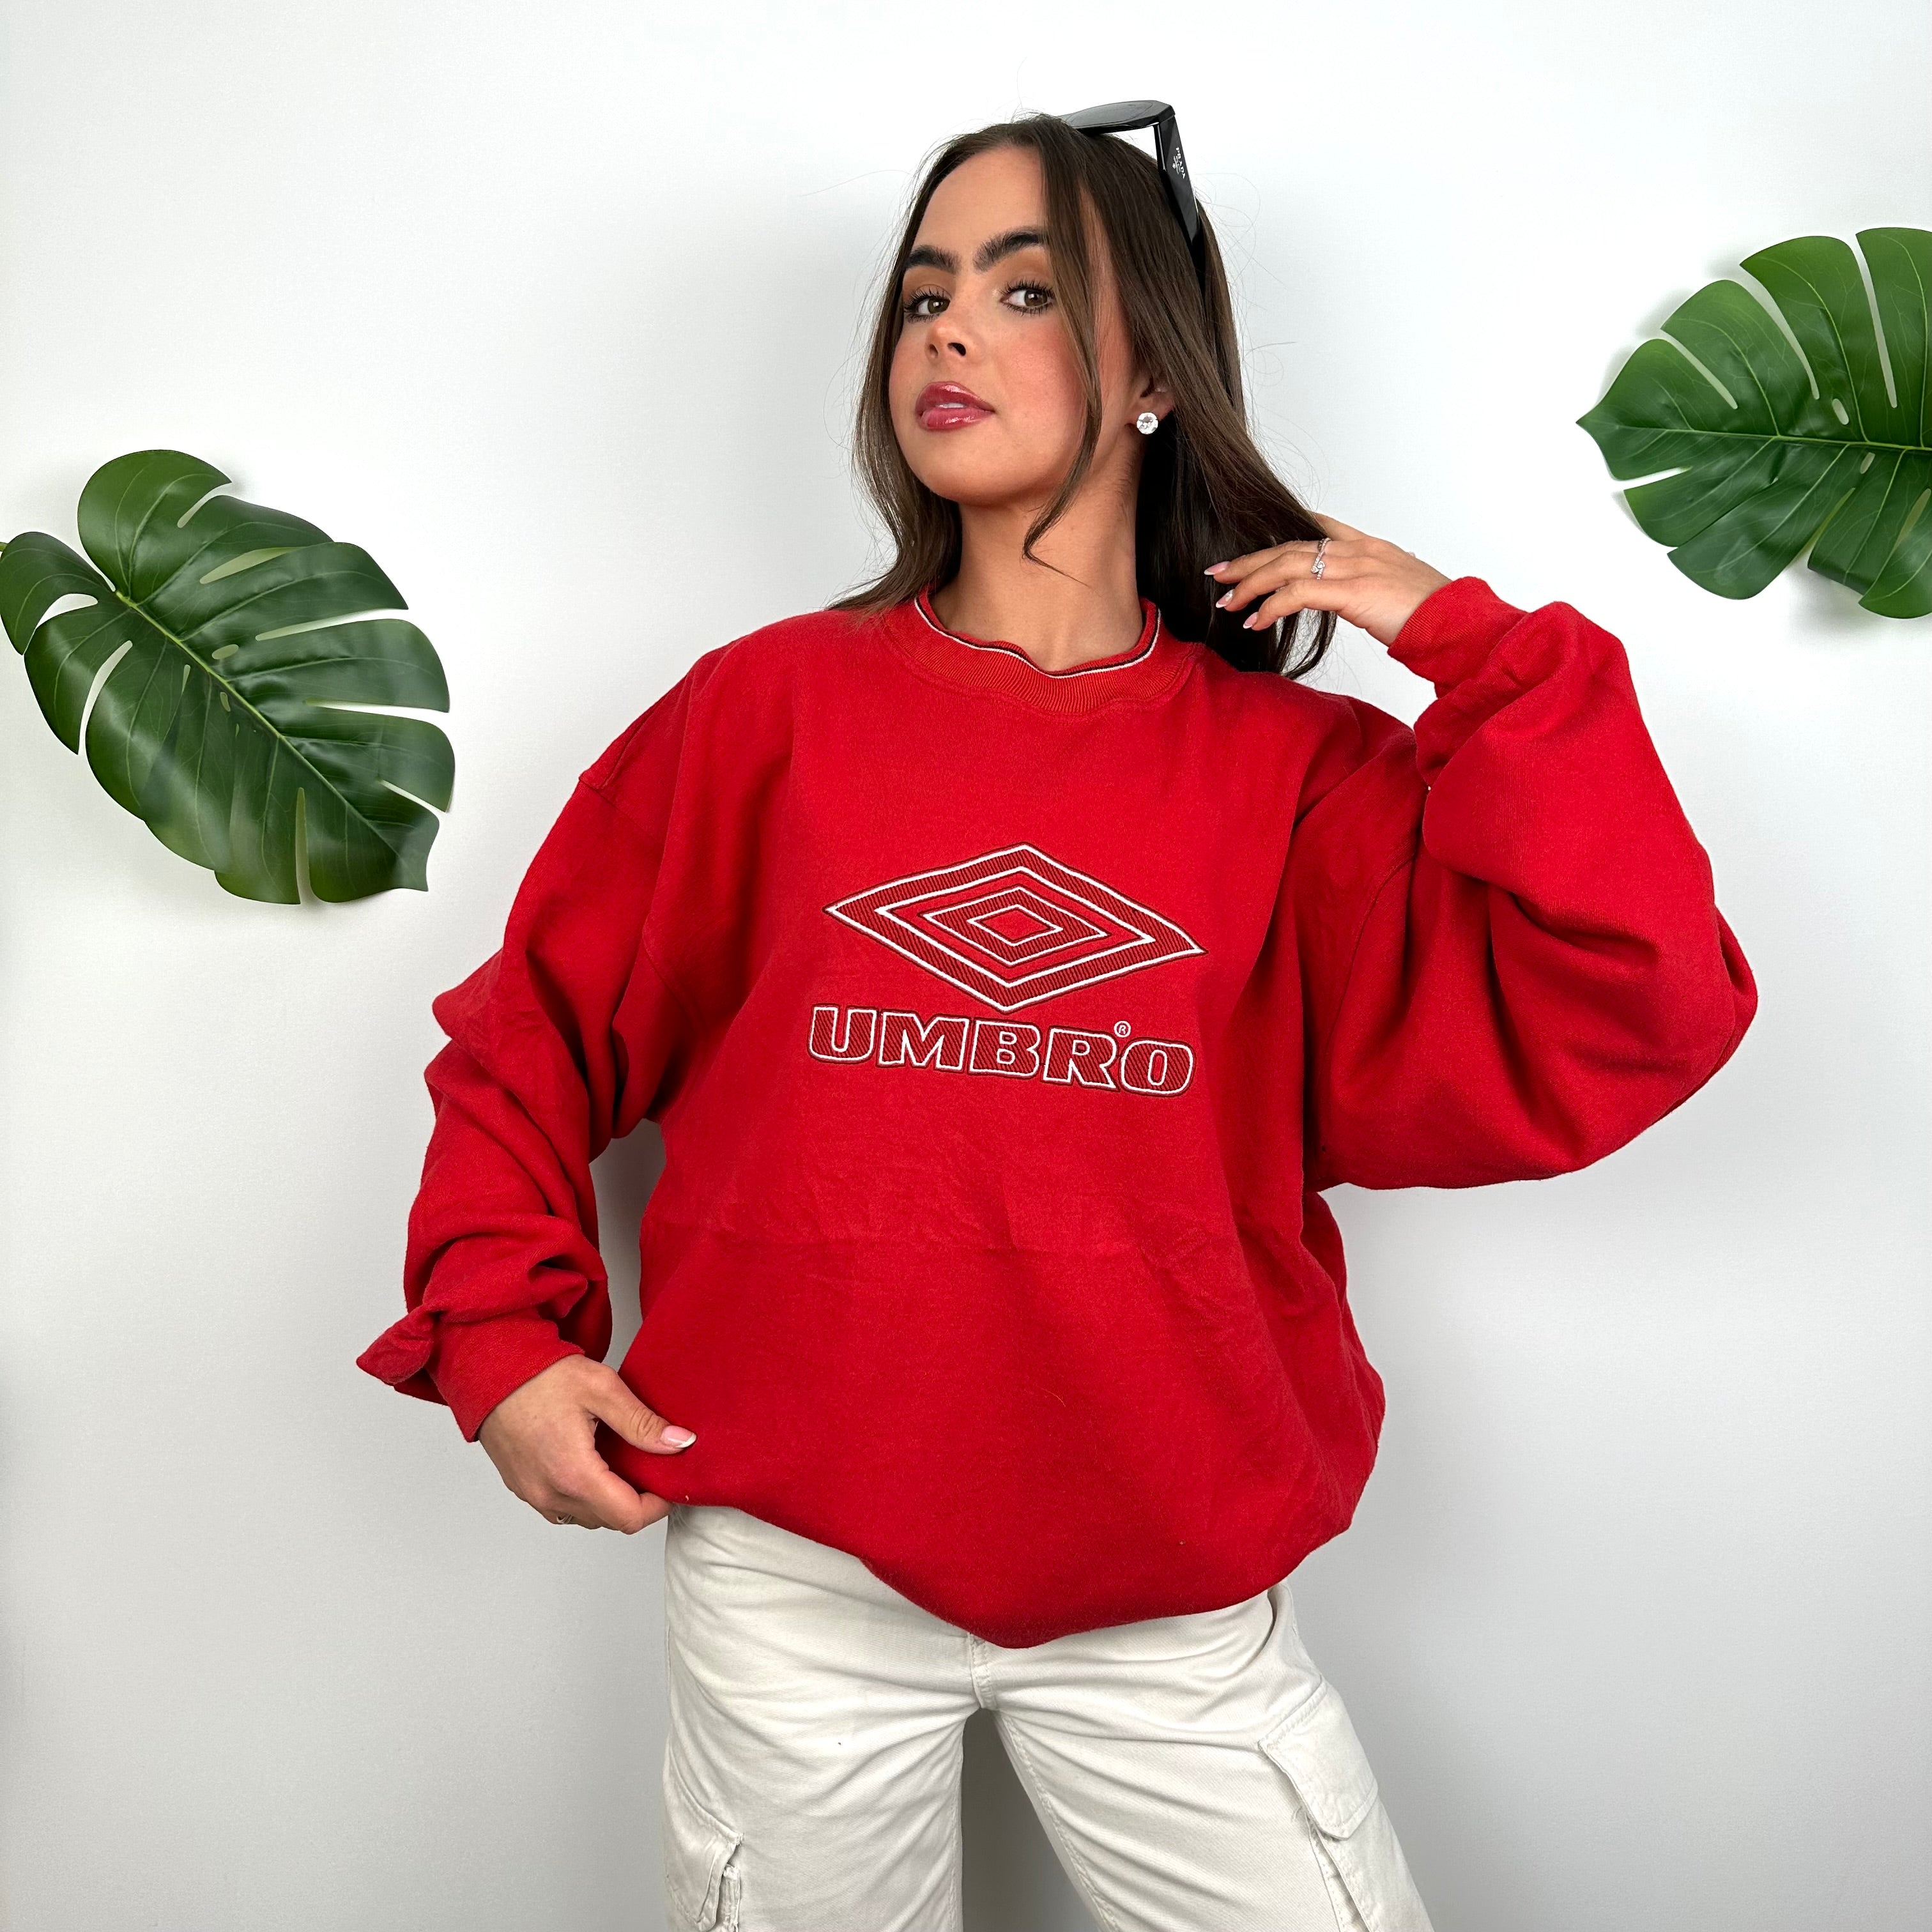 Umbro Red Embroidered Spell Out Sweatshirt (L)